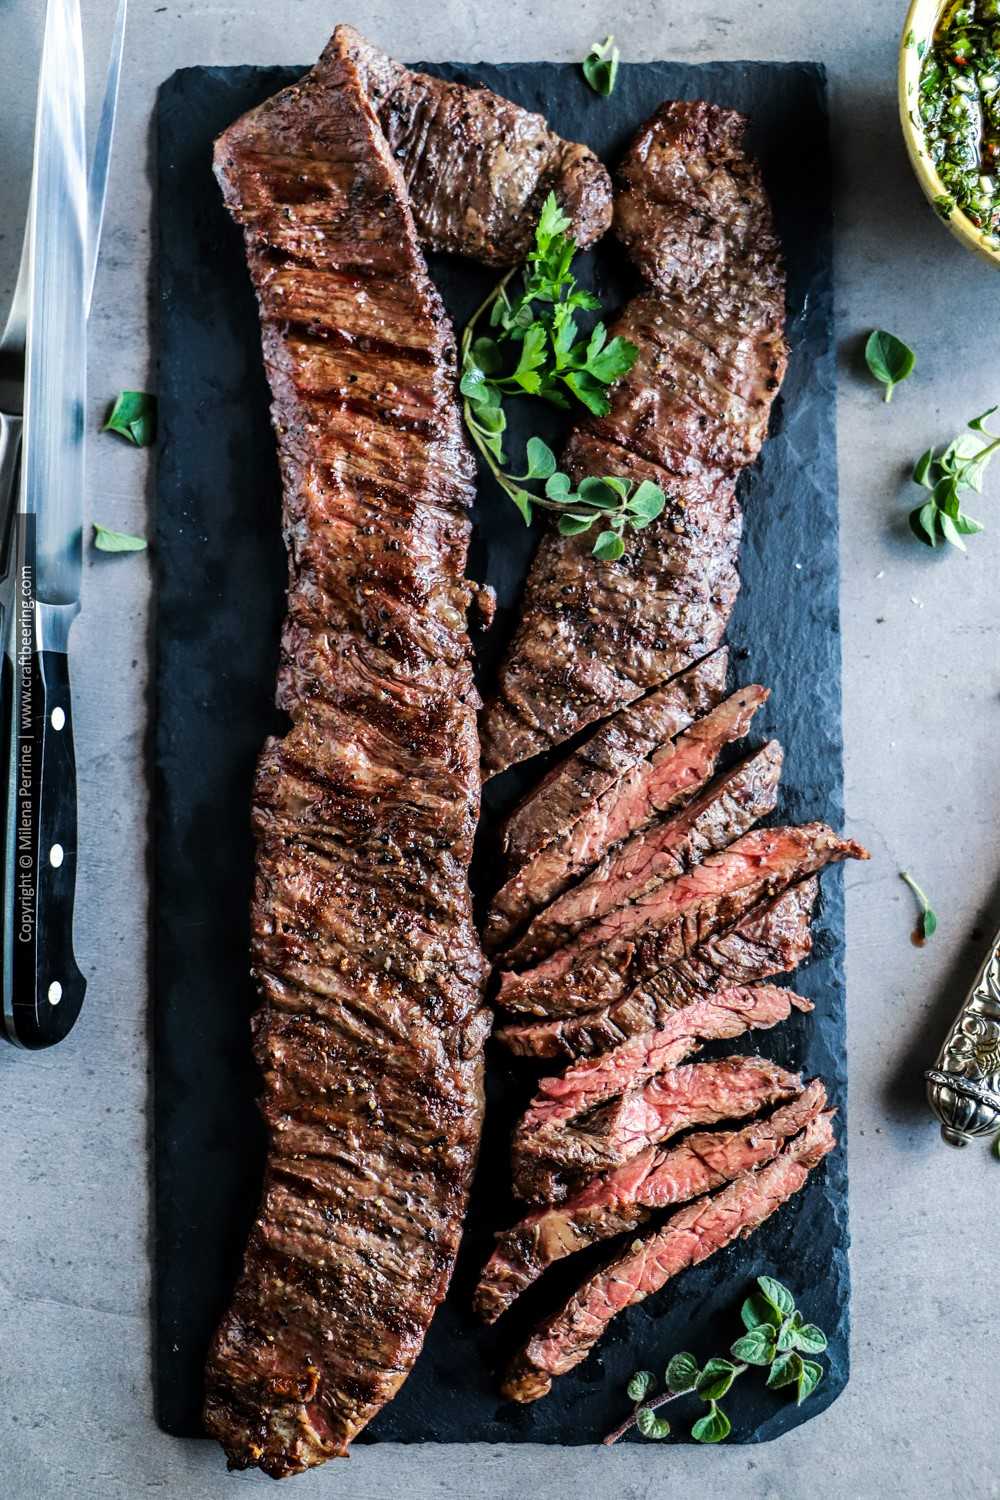 Grilled outside skirt steak with chimichurri in the style of Argentinian entrana a la parrilla